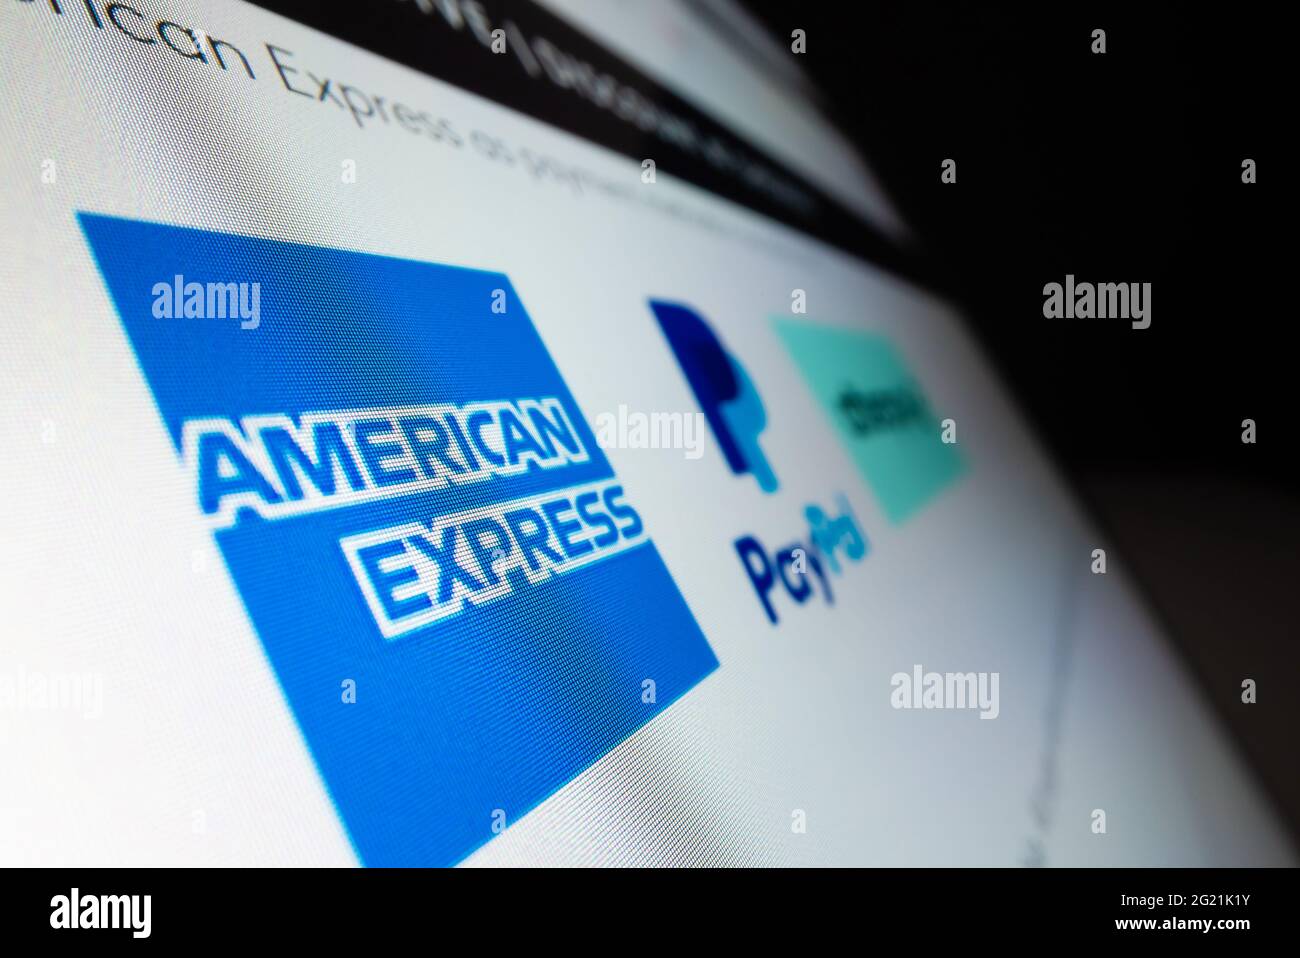 Close-up view of American Express logo on online shopping website Stock Photo